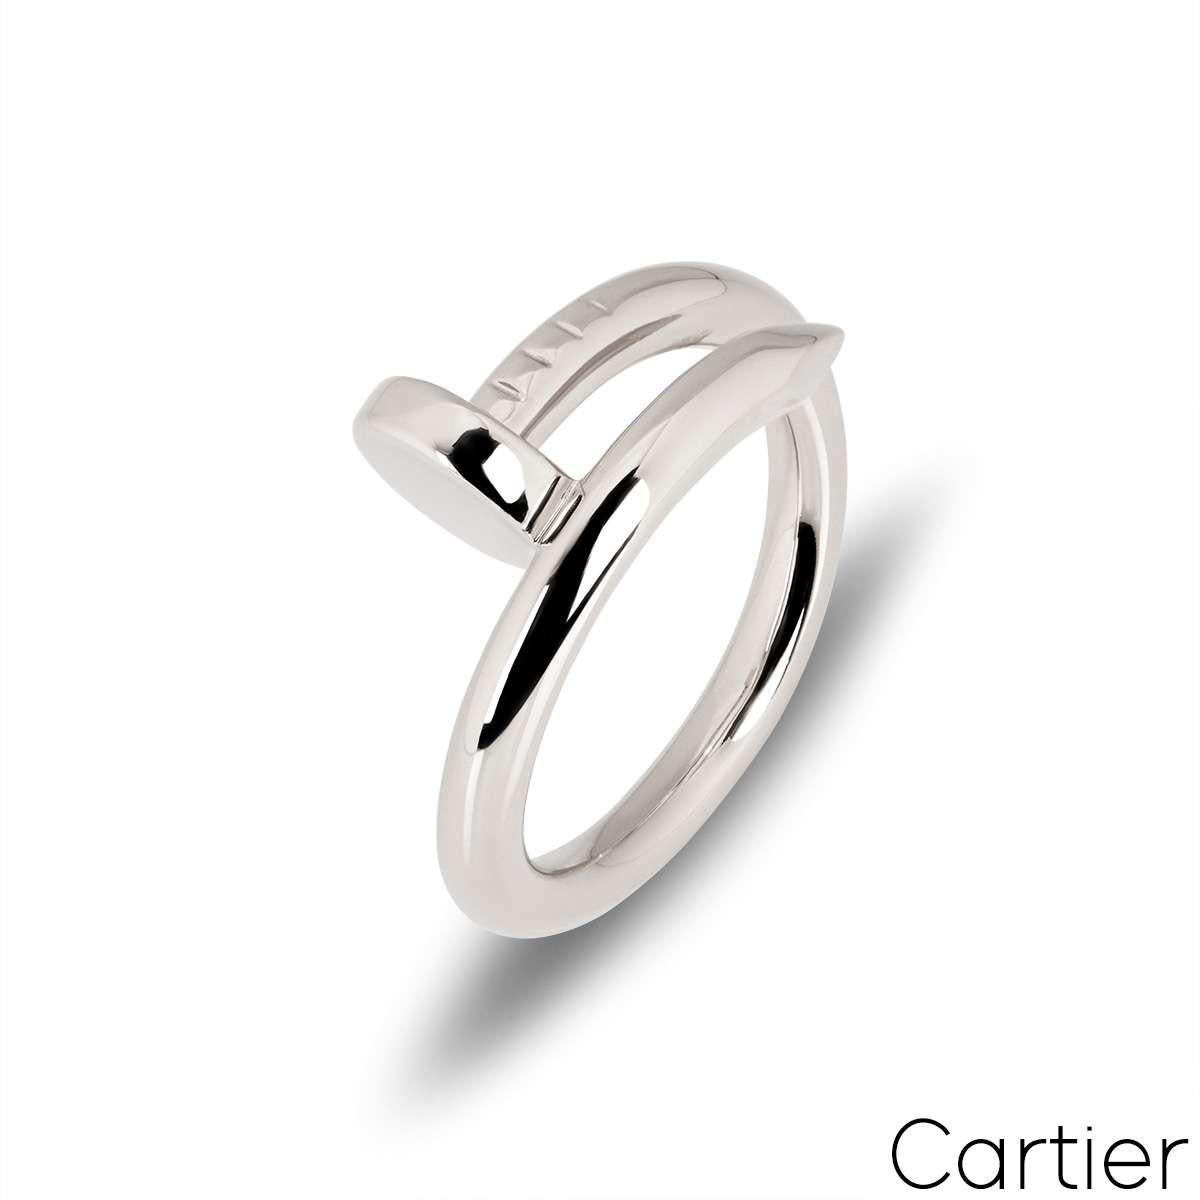 An 18k white gold Juste un Clou ring from Cartier. The ring is wrapped around with a nail head at one tip and a nail end at the other tip. A size UK K½ - EU 50, this ring has a gross weight of 7.96 grams.

Comes complete with a RichDiamonds